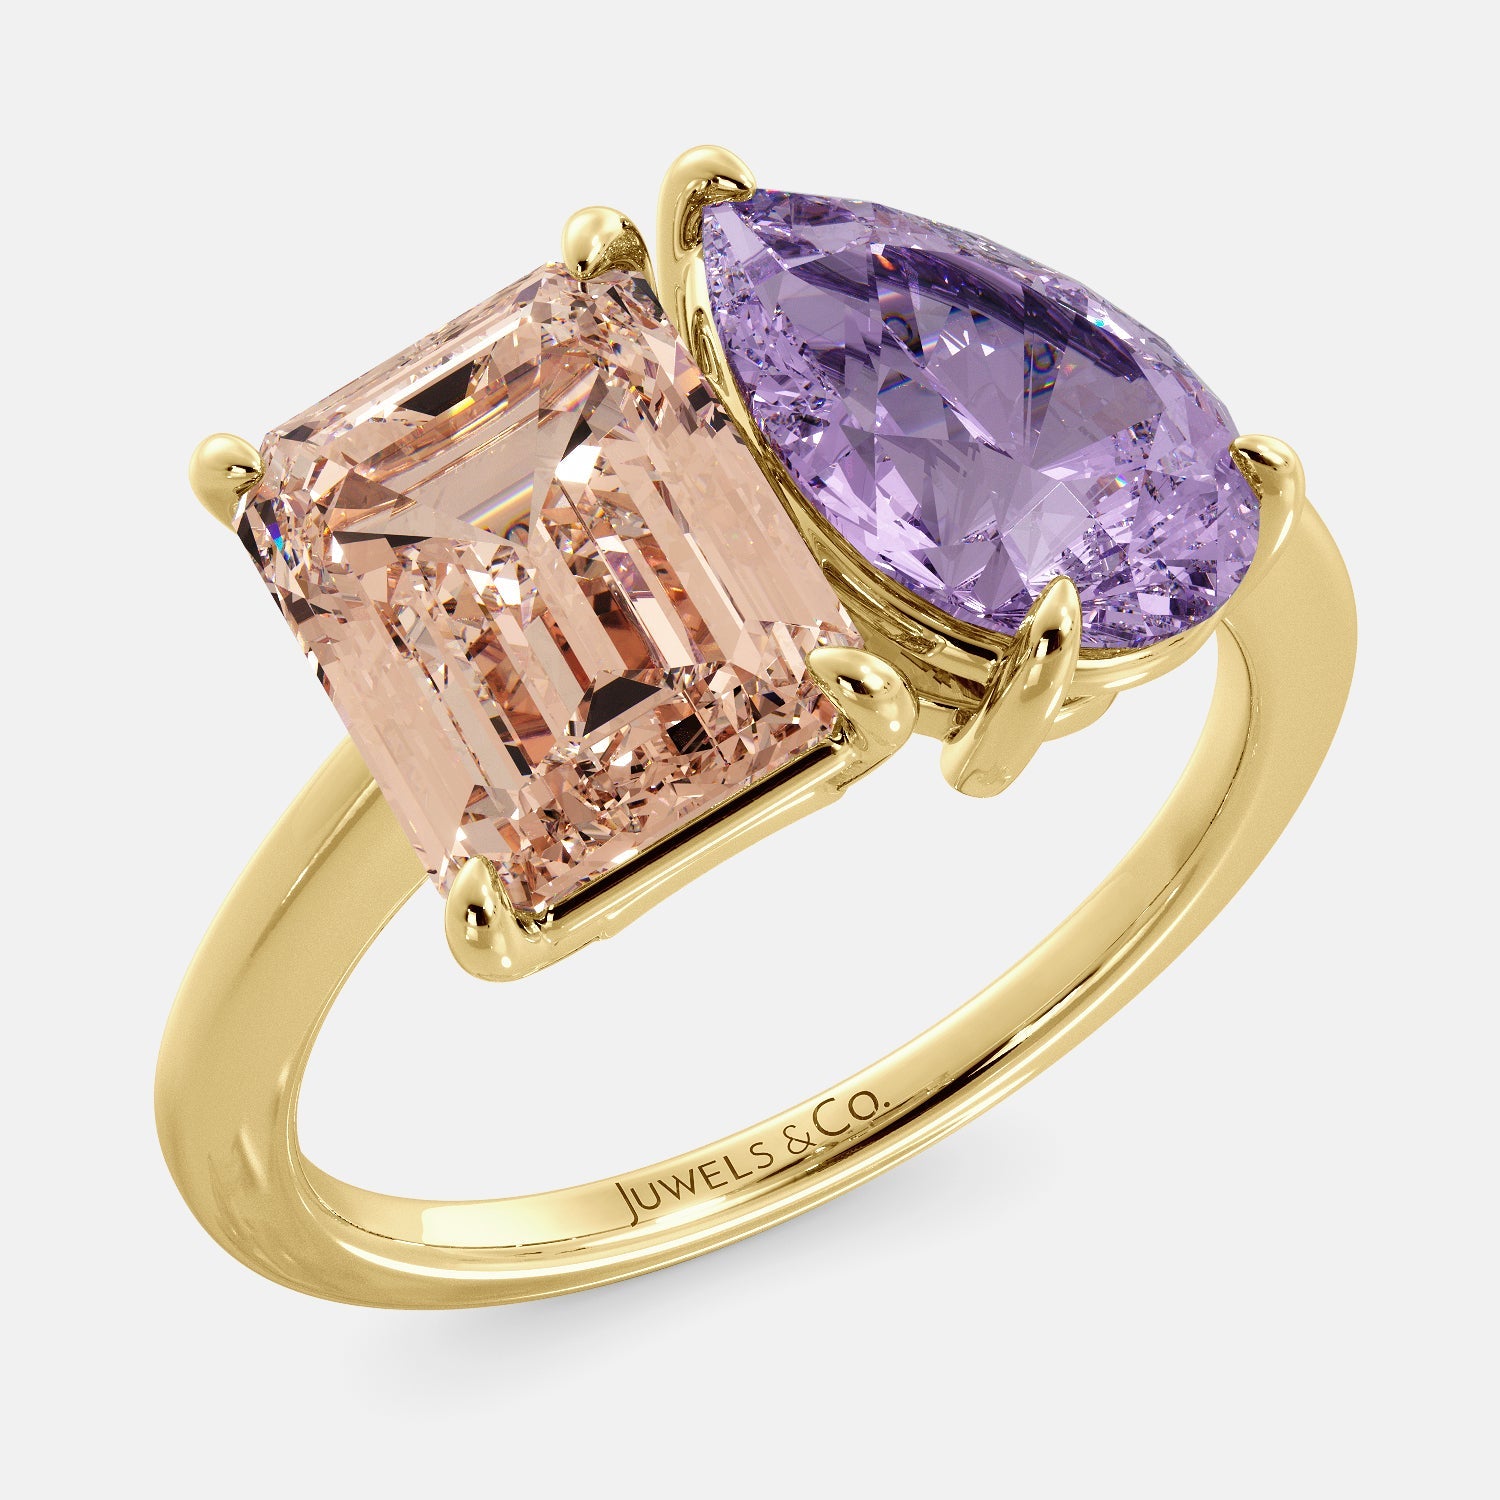 A toi et moi ring with a pear-shaped amethyst and an emerald-cut morganite. The ring is set in a 14k yellow gold band and is available in all sizes. The morganite is a pink gemstone that is said to promote love, compassion, and forgiveness. The amethyst is a purple gemstone that is said to promote peace, love, and harmony. The toi et moi ring is a beautiful and unique way to show your love and commitment to someone special.